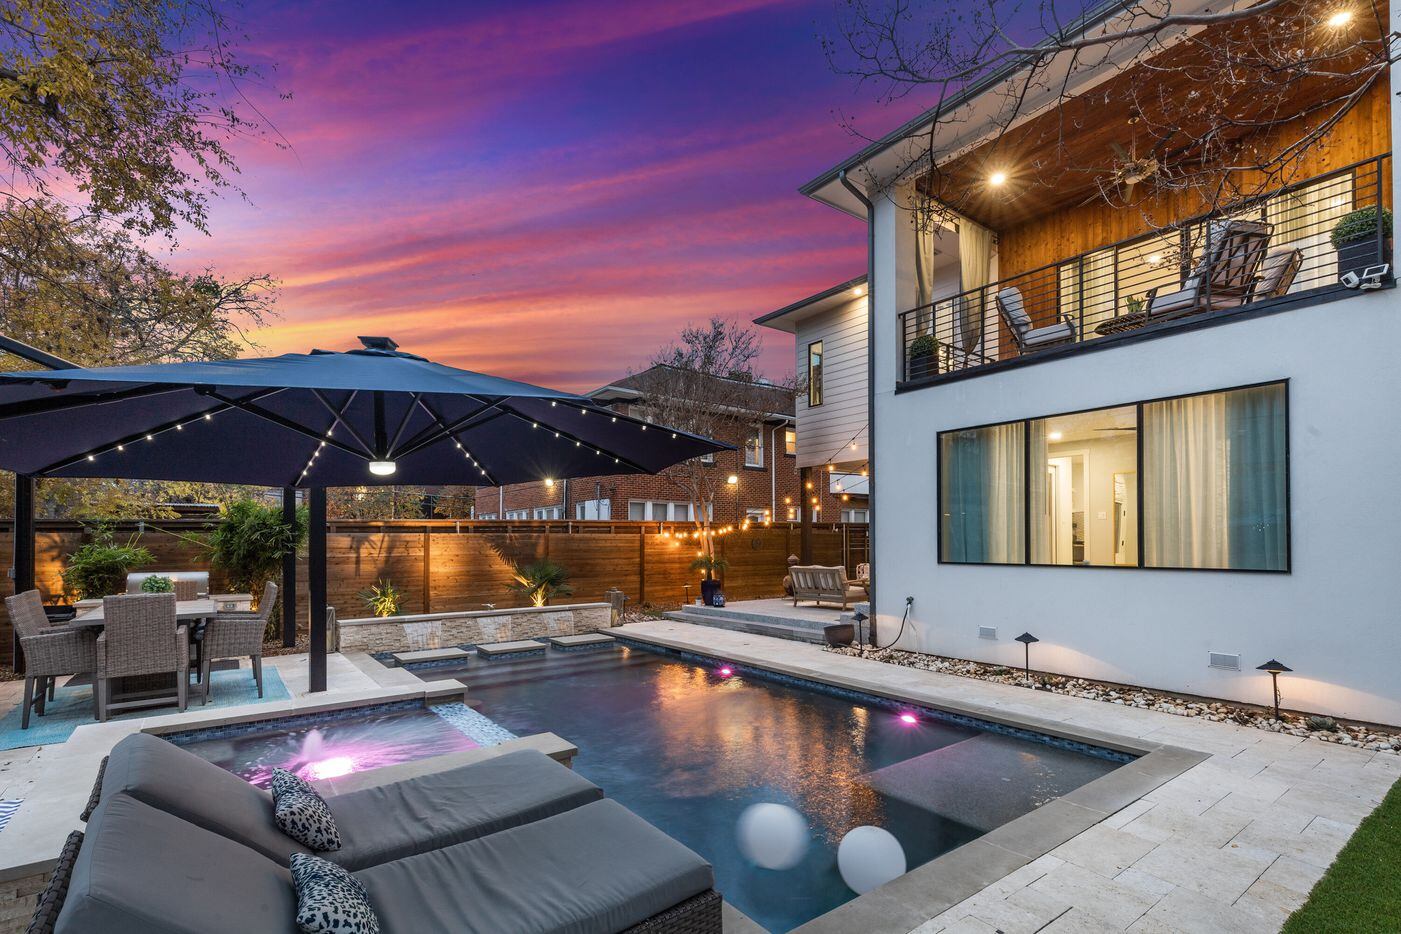 The backyard features a resort-style pool, complete with a navy blue patio umbrella, and...